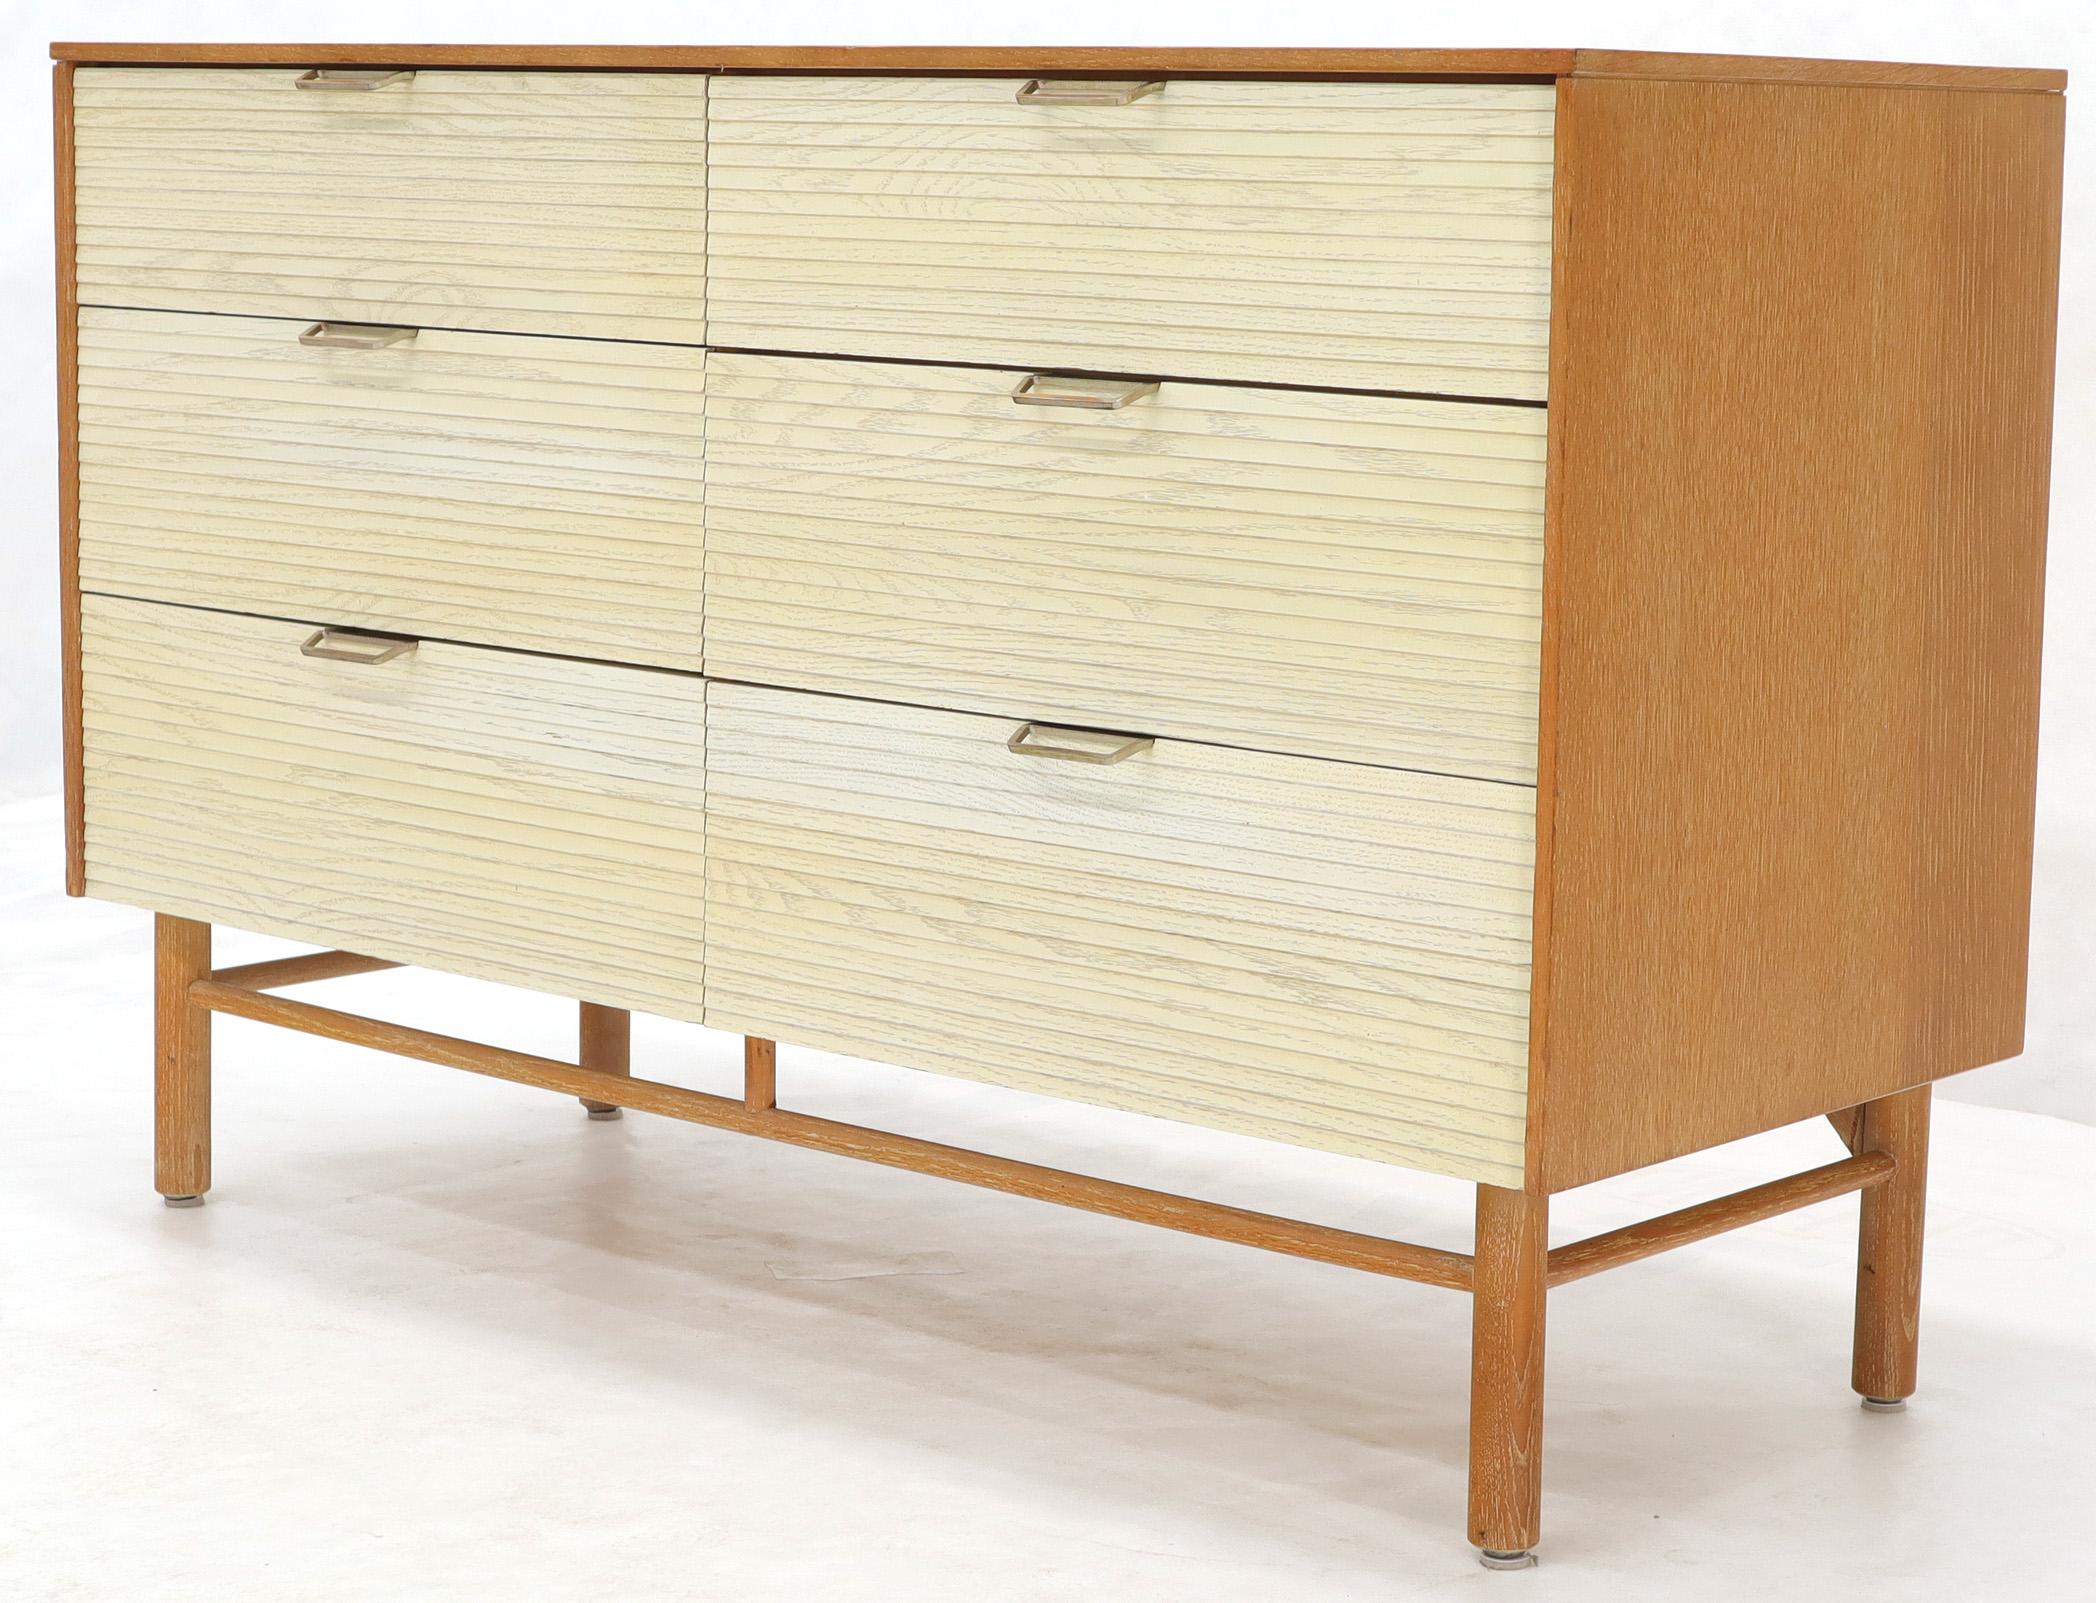 Mid-Century Modern cerused oak 6 drawer dresser by Mengel. Two-tone finish natural oak with white louver shape drawer fronts. Dowel shape legs with stretchers. NYC area delivery starts from $150.